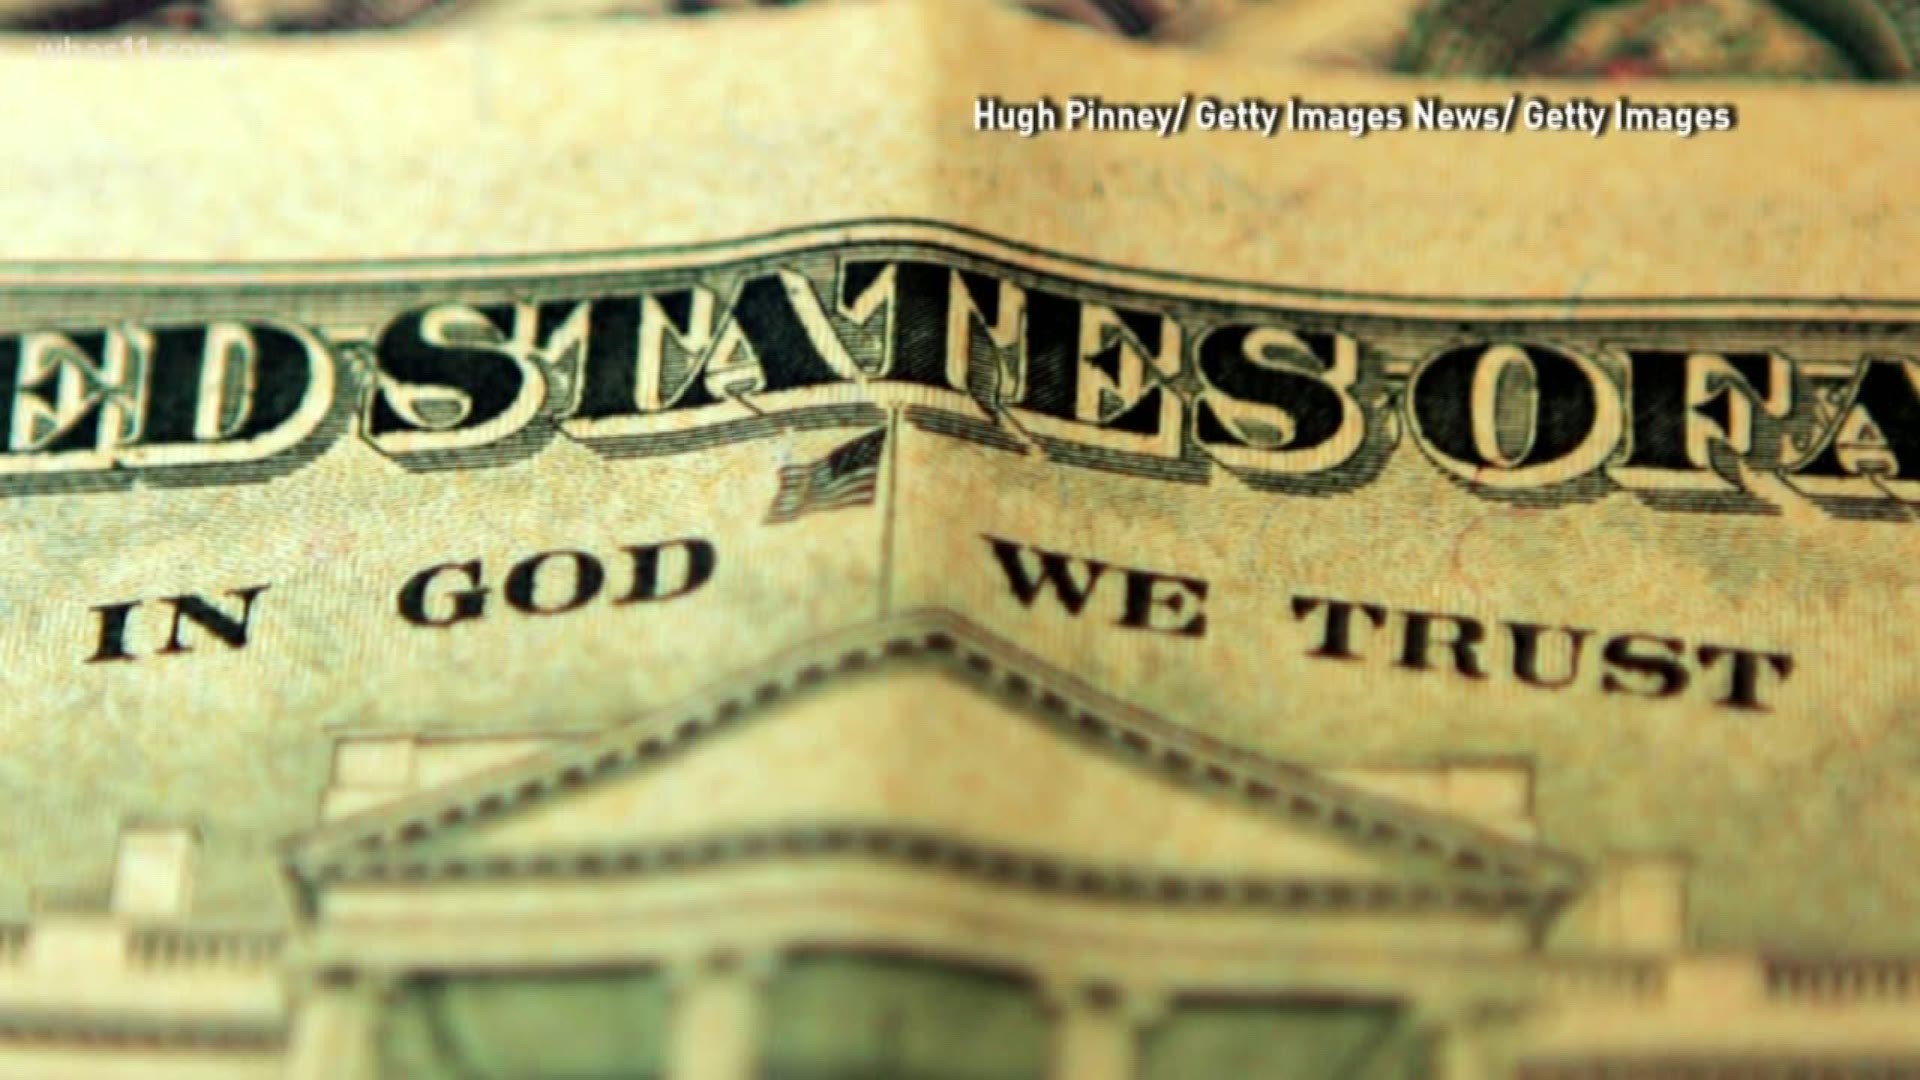 Rep. Brandon Reed is pushing for the phrase "In God We Trust" to be displayed inside Kentucky's public schools